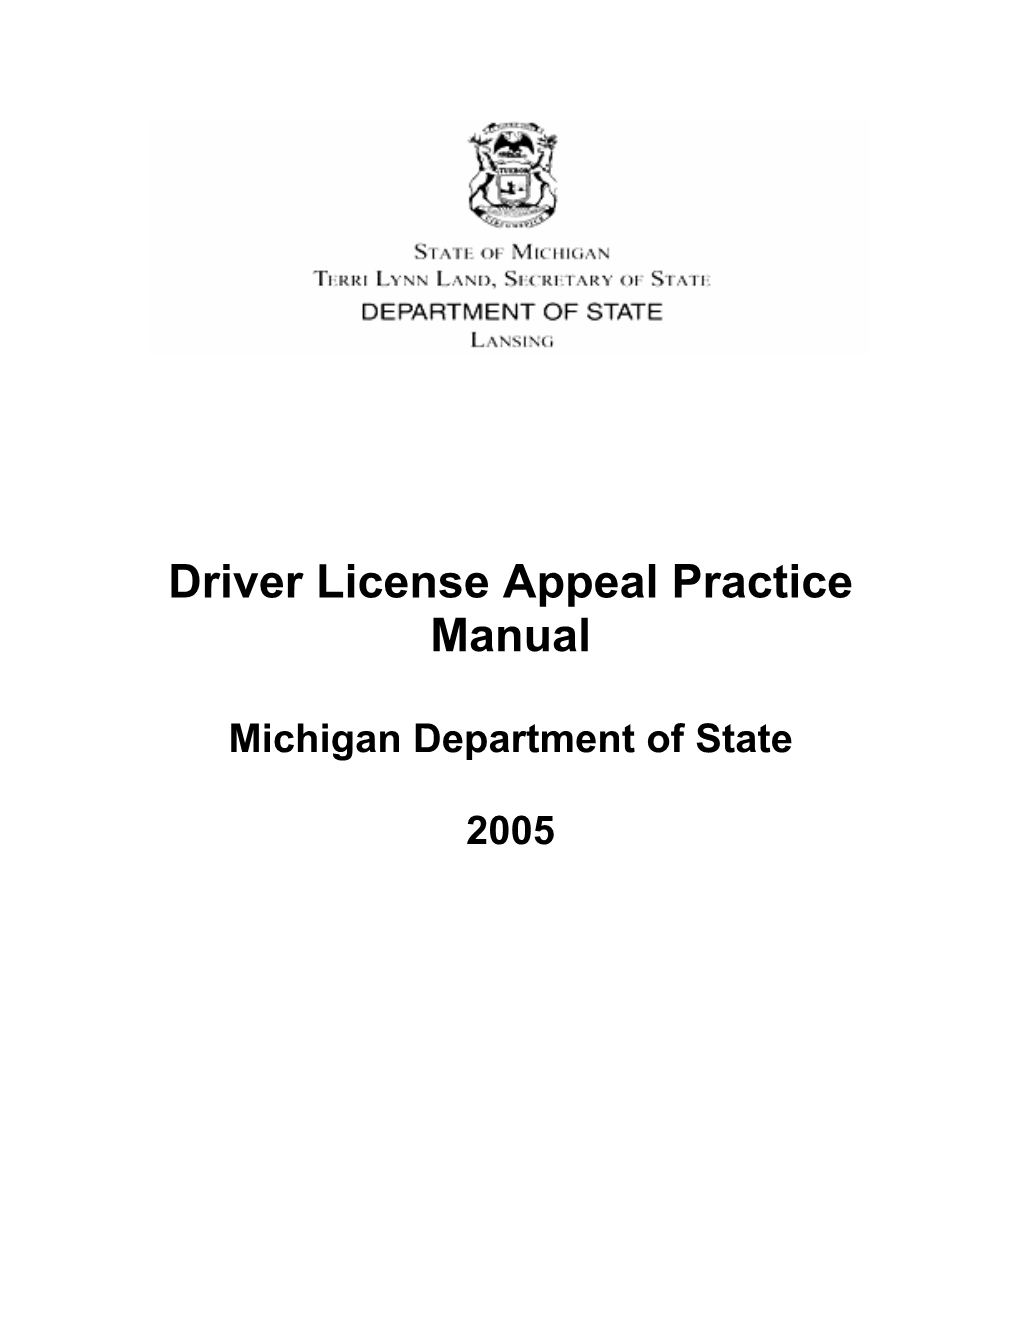 Michigan Department of State Driver License Appeal Practice Manual